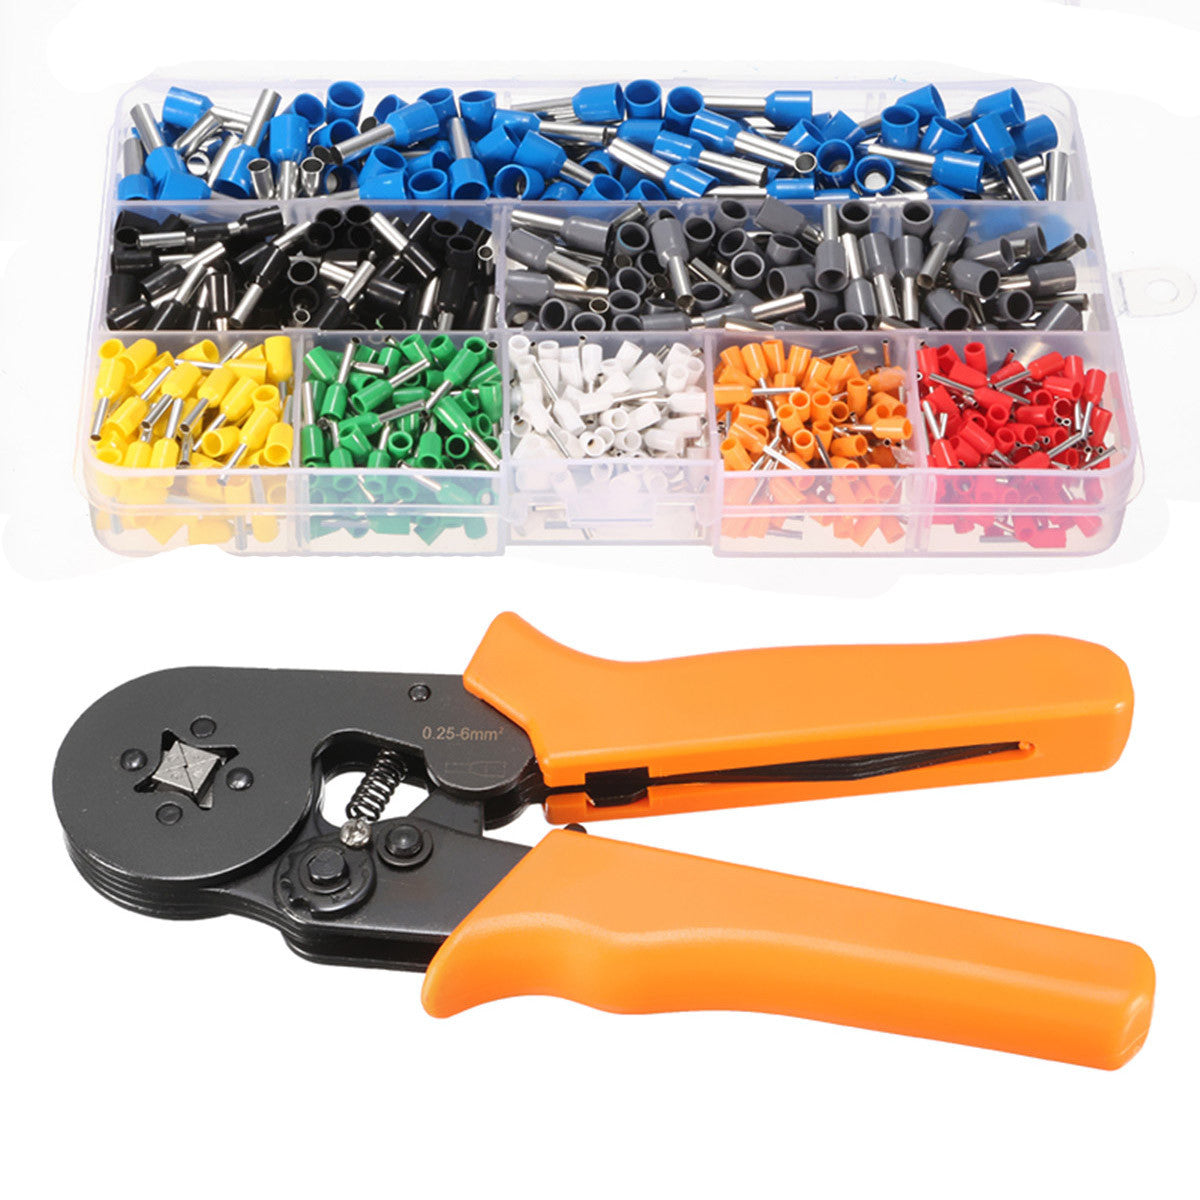 tools 23AWG to 10AWG Self Adjusting Ratcheting Ferrule Crimper Plier Tool with 800pcs Connector Terminal